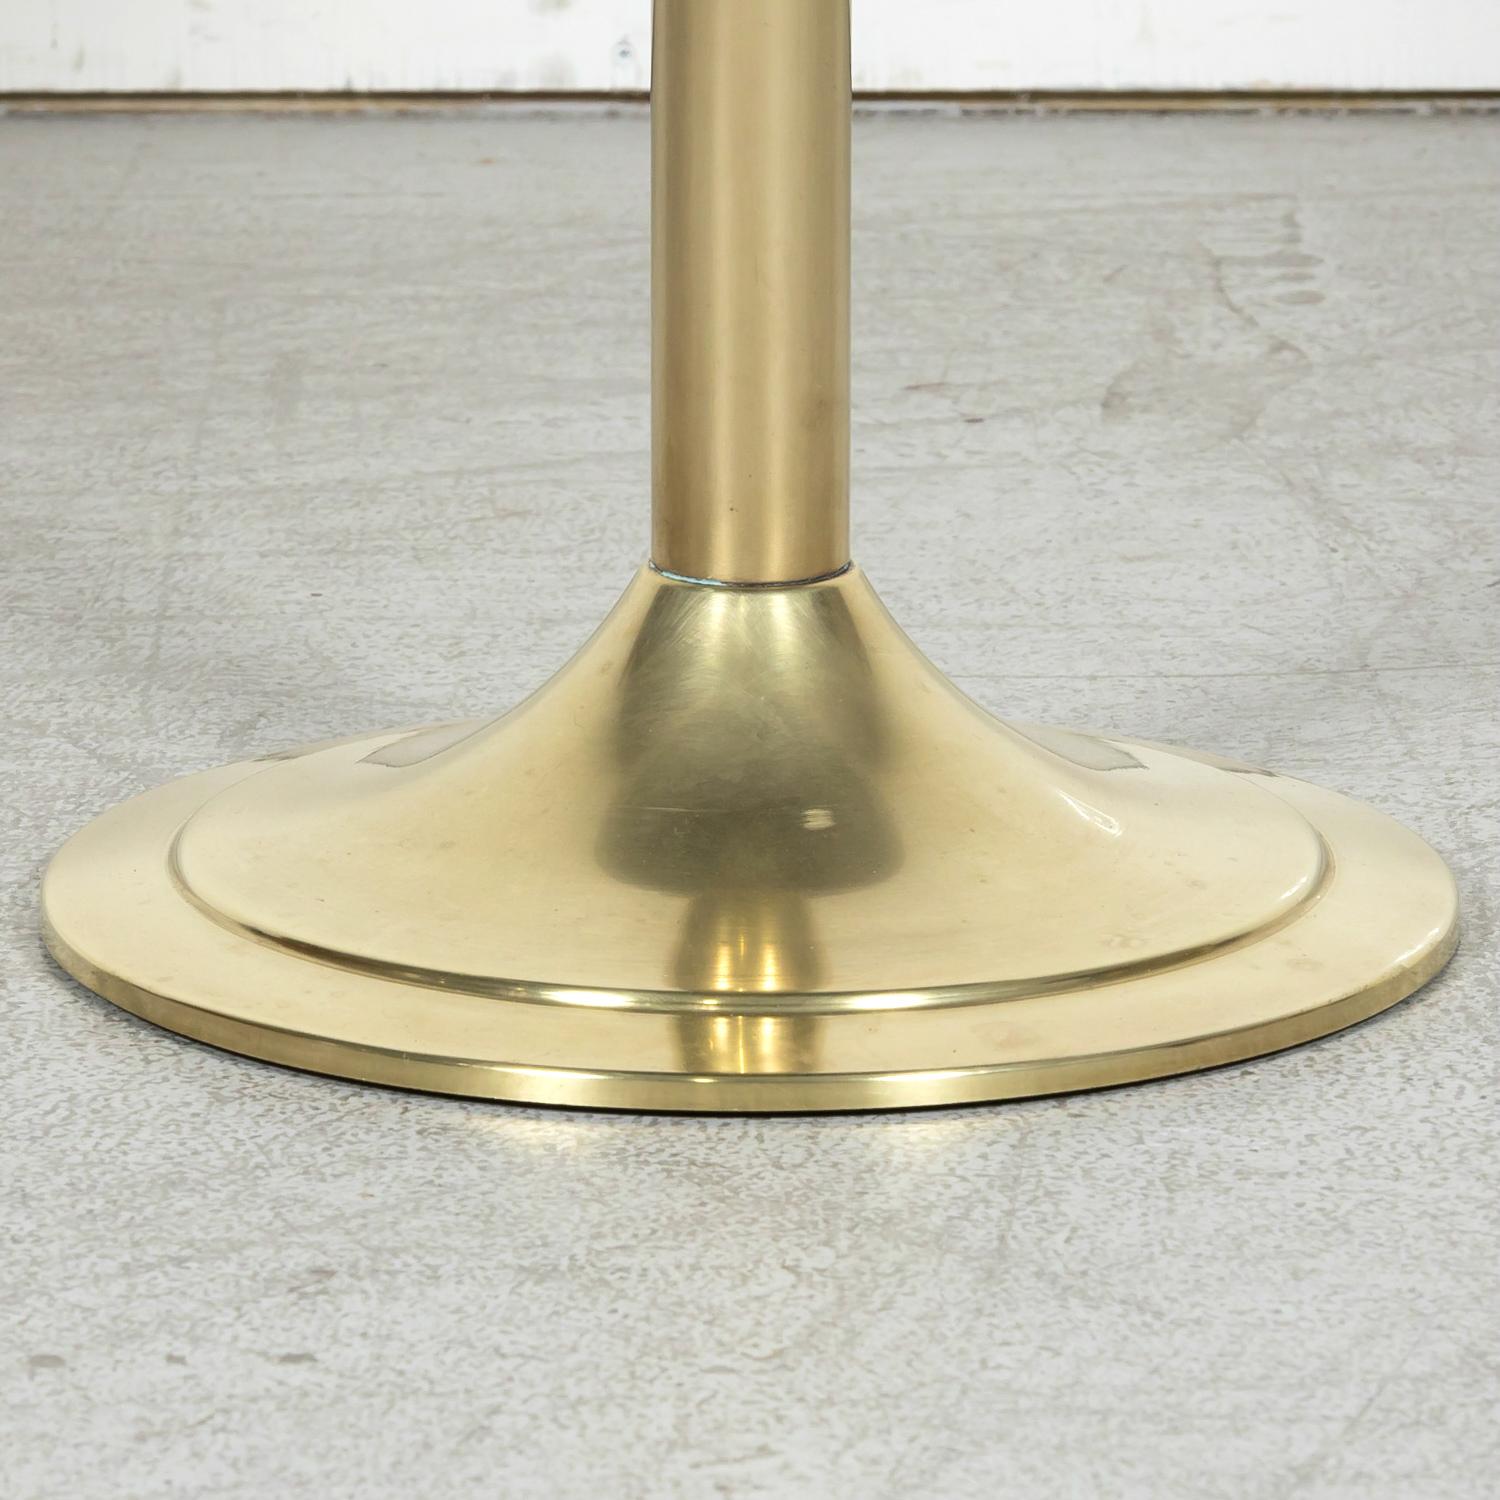 Vintage 1970s Mid-Century Modern French Brass and Marble Top Cocktail Side Table For Sale 2